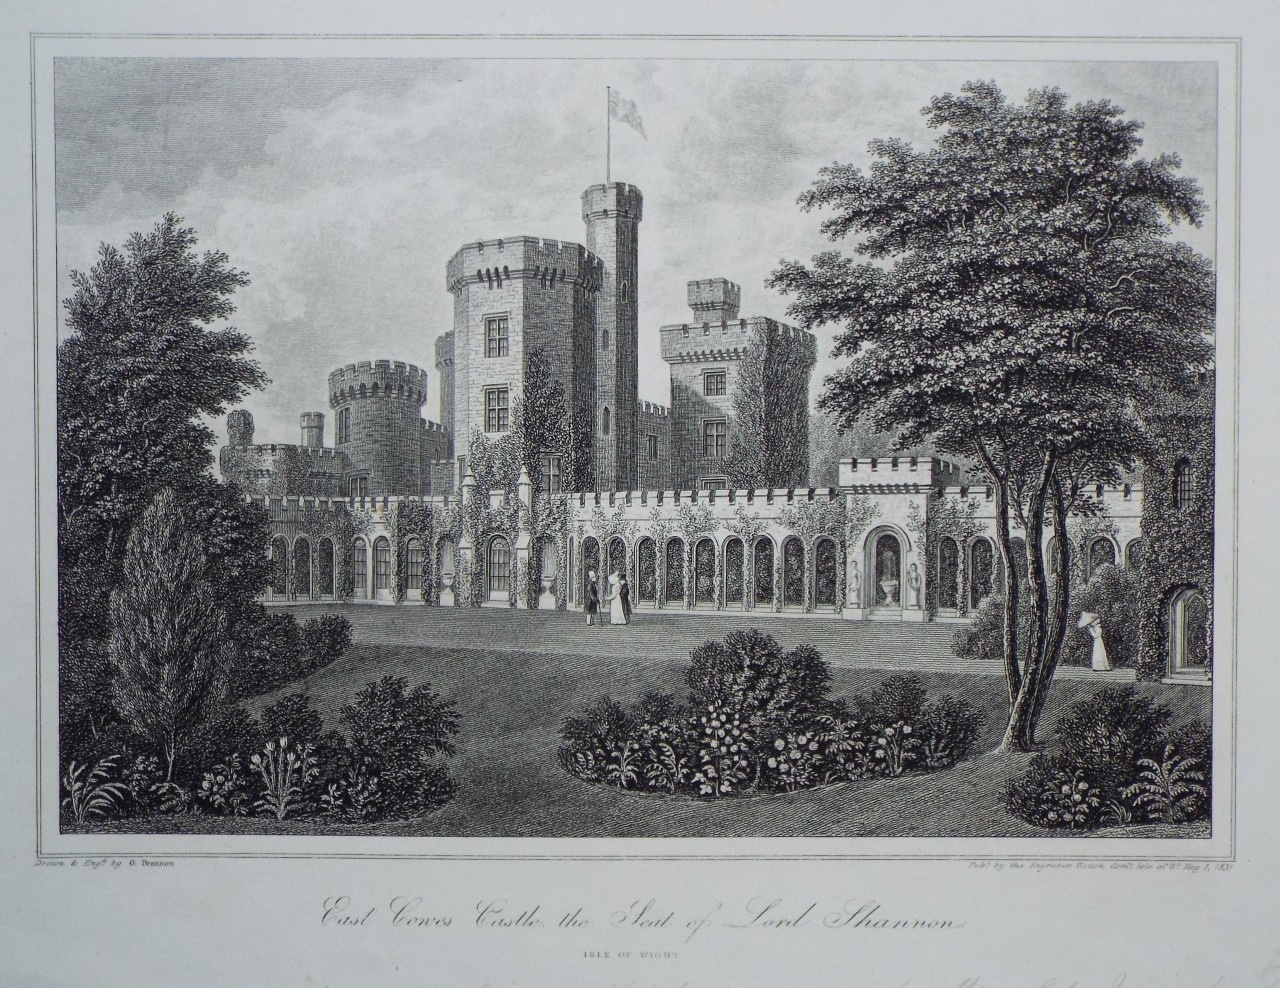 Print - East Cowes Castle, the Seat of Lord Shannon. Isle of Wight. - Brannon